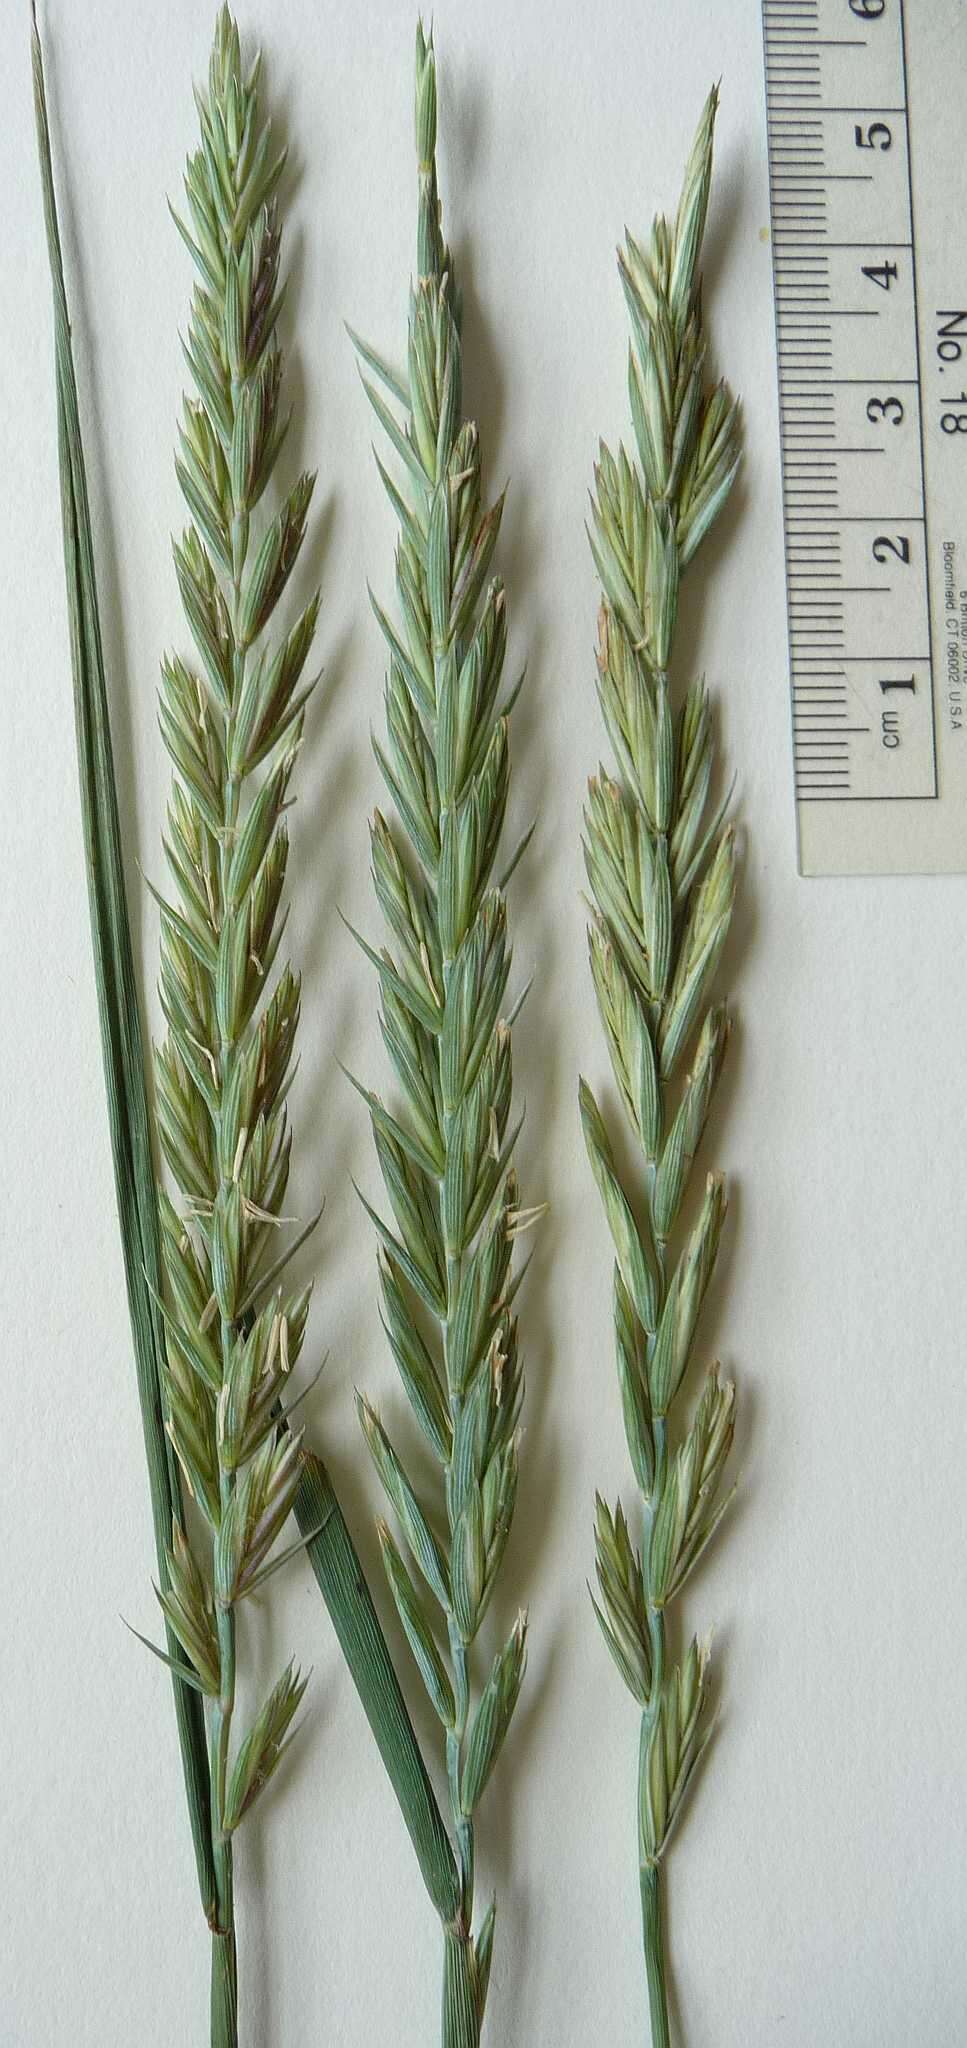 Image of Elymus repens subsp. repens